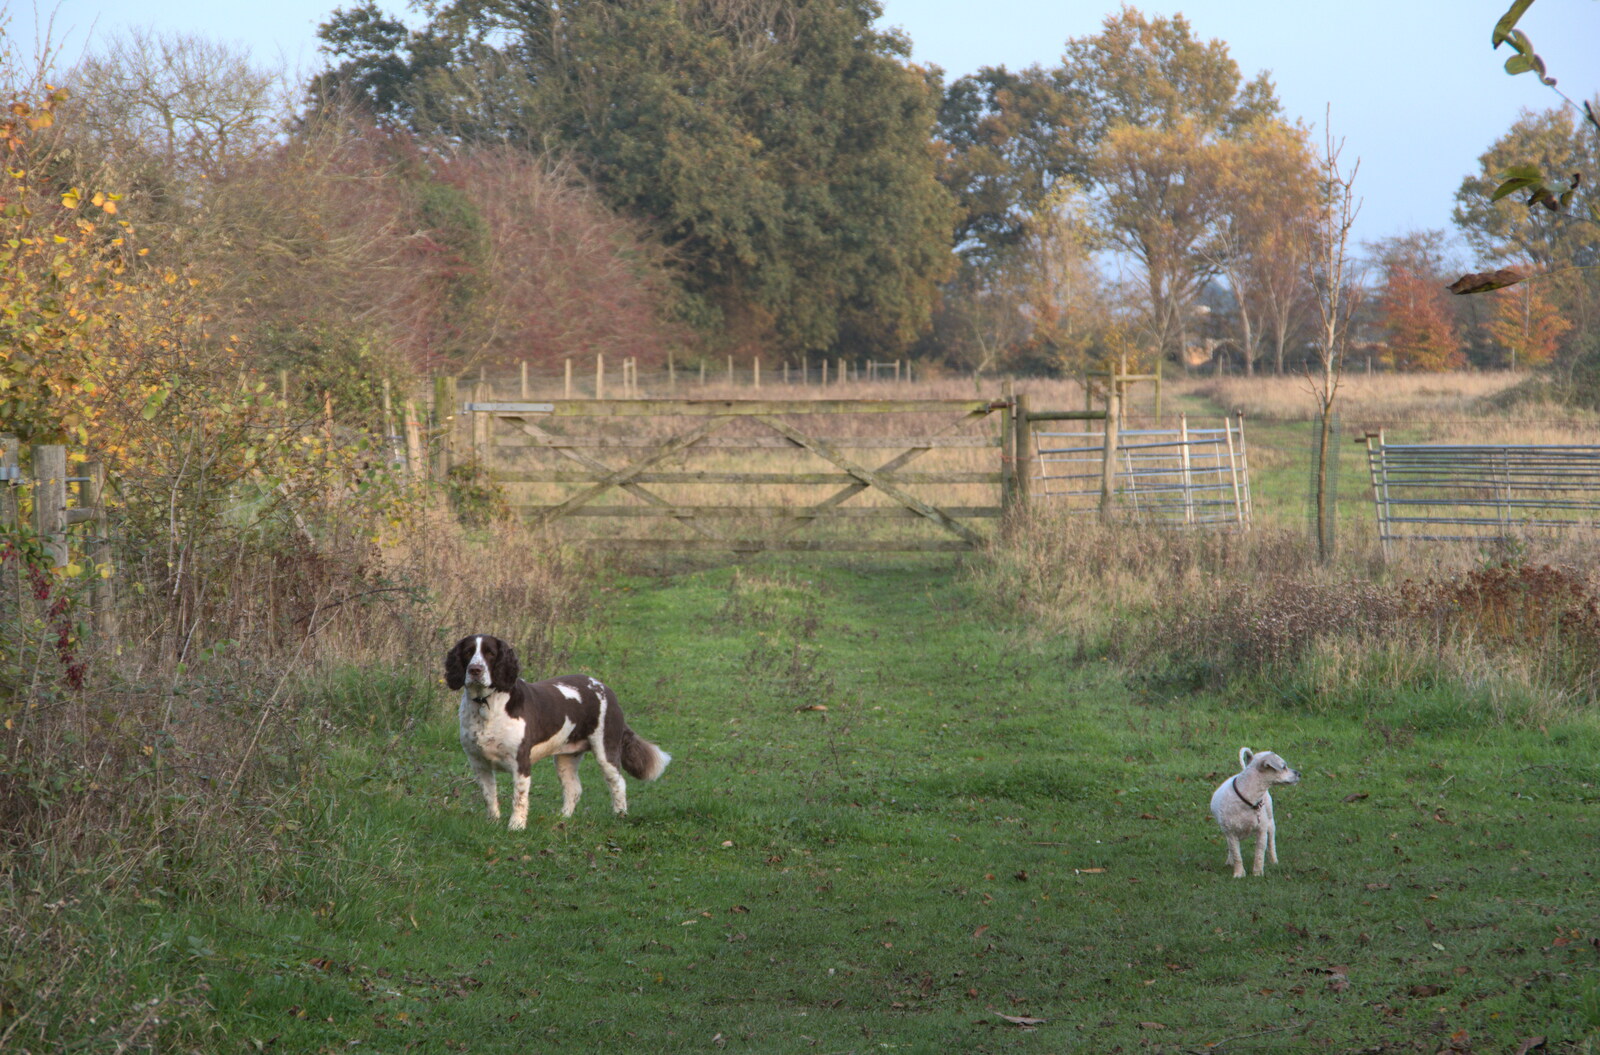 A couple of dogs appear from To See the Hairy Pigs, Thrandeston, Suffolk - 7th November 2020